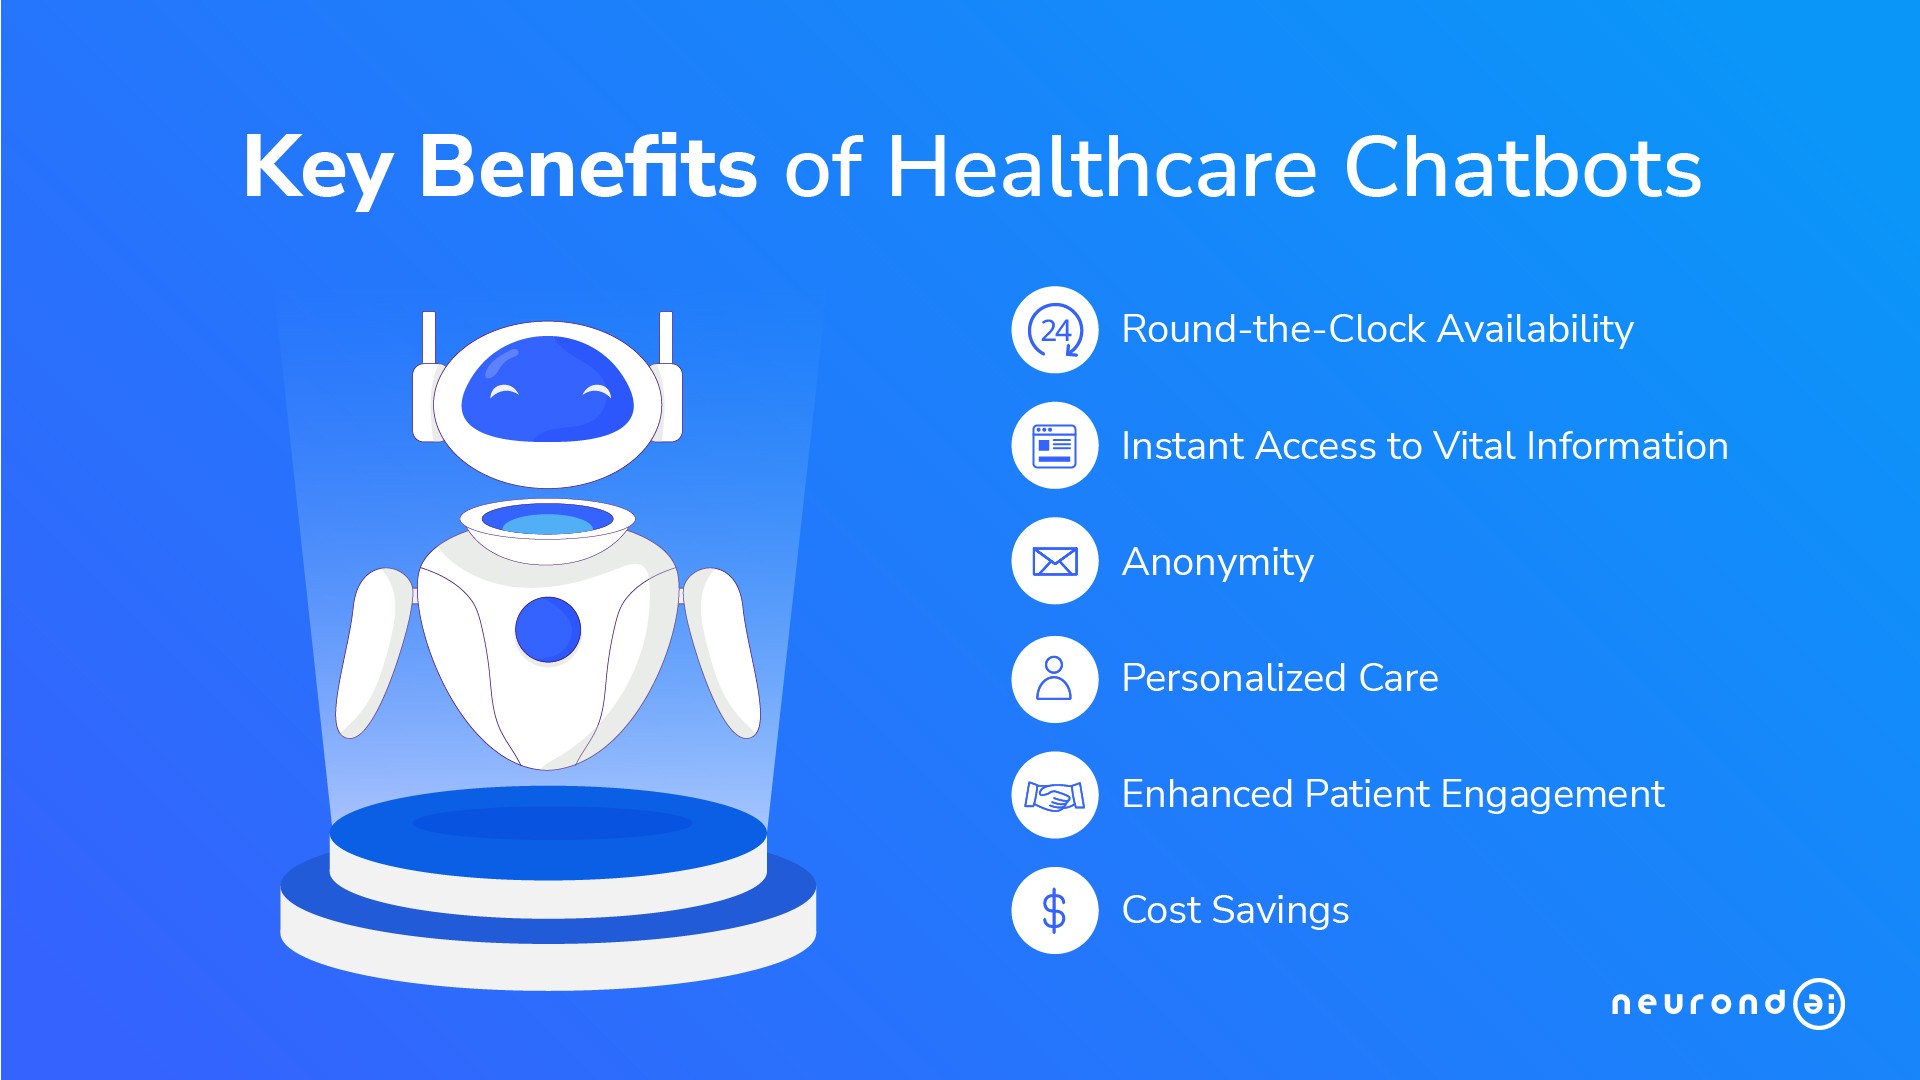 The Key Advantages of Healthcare Chatbots